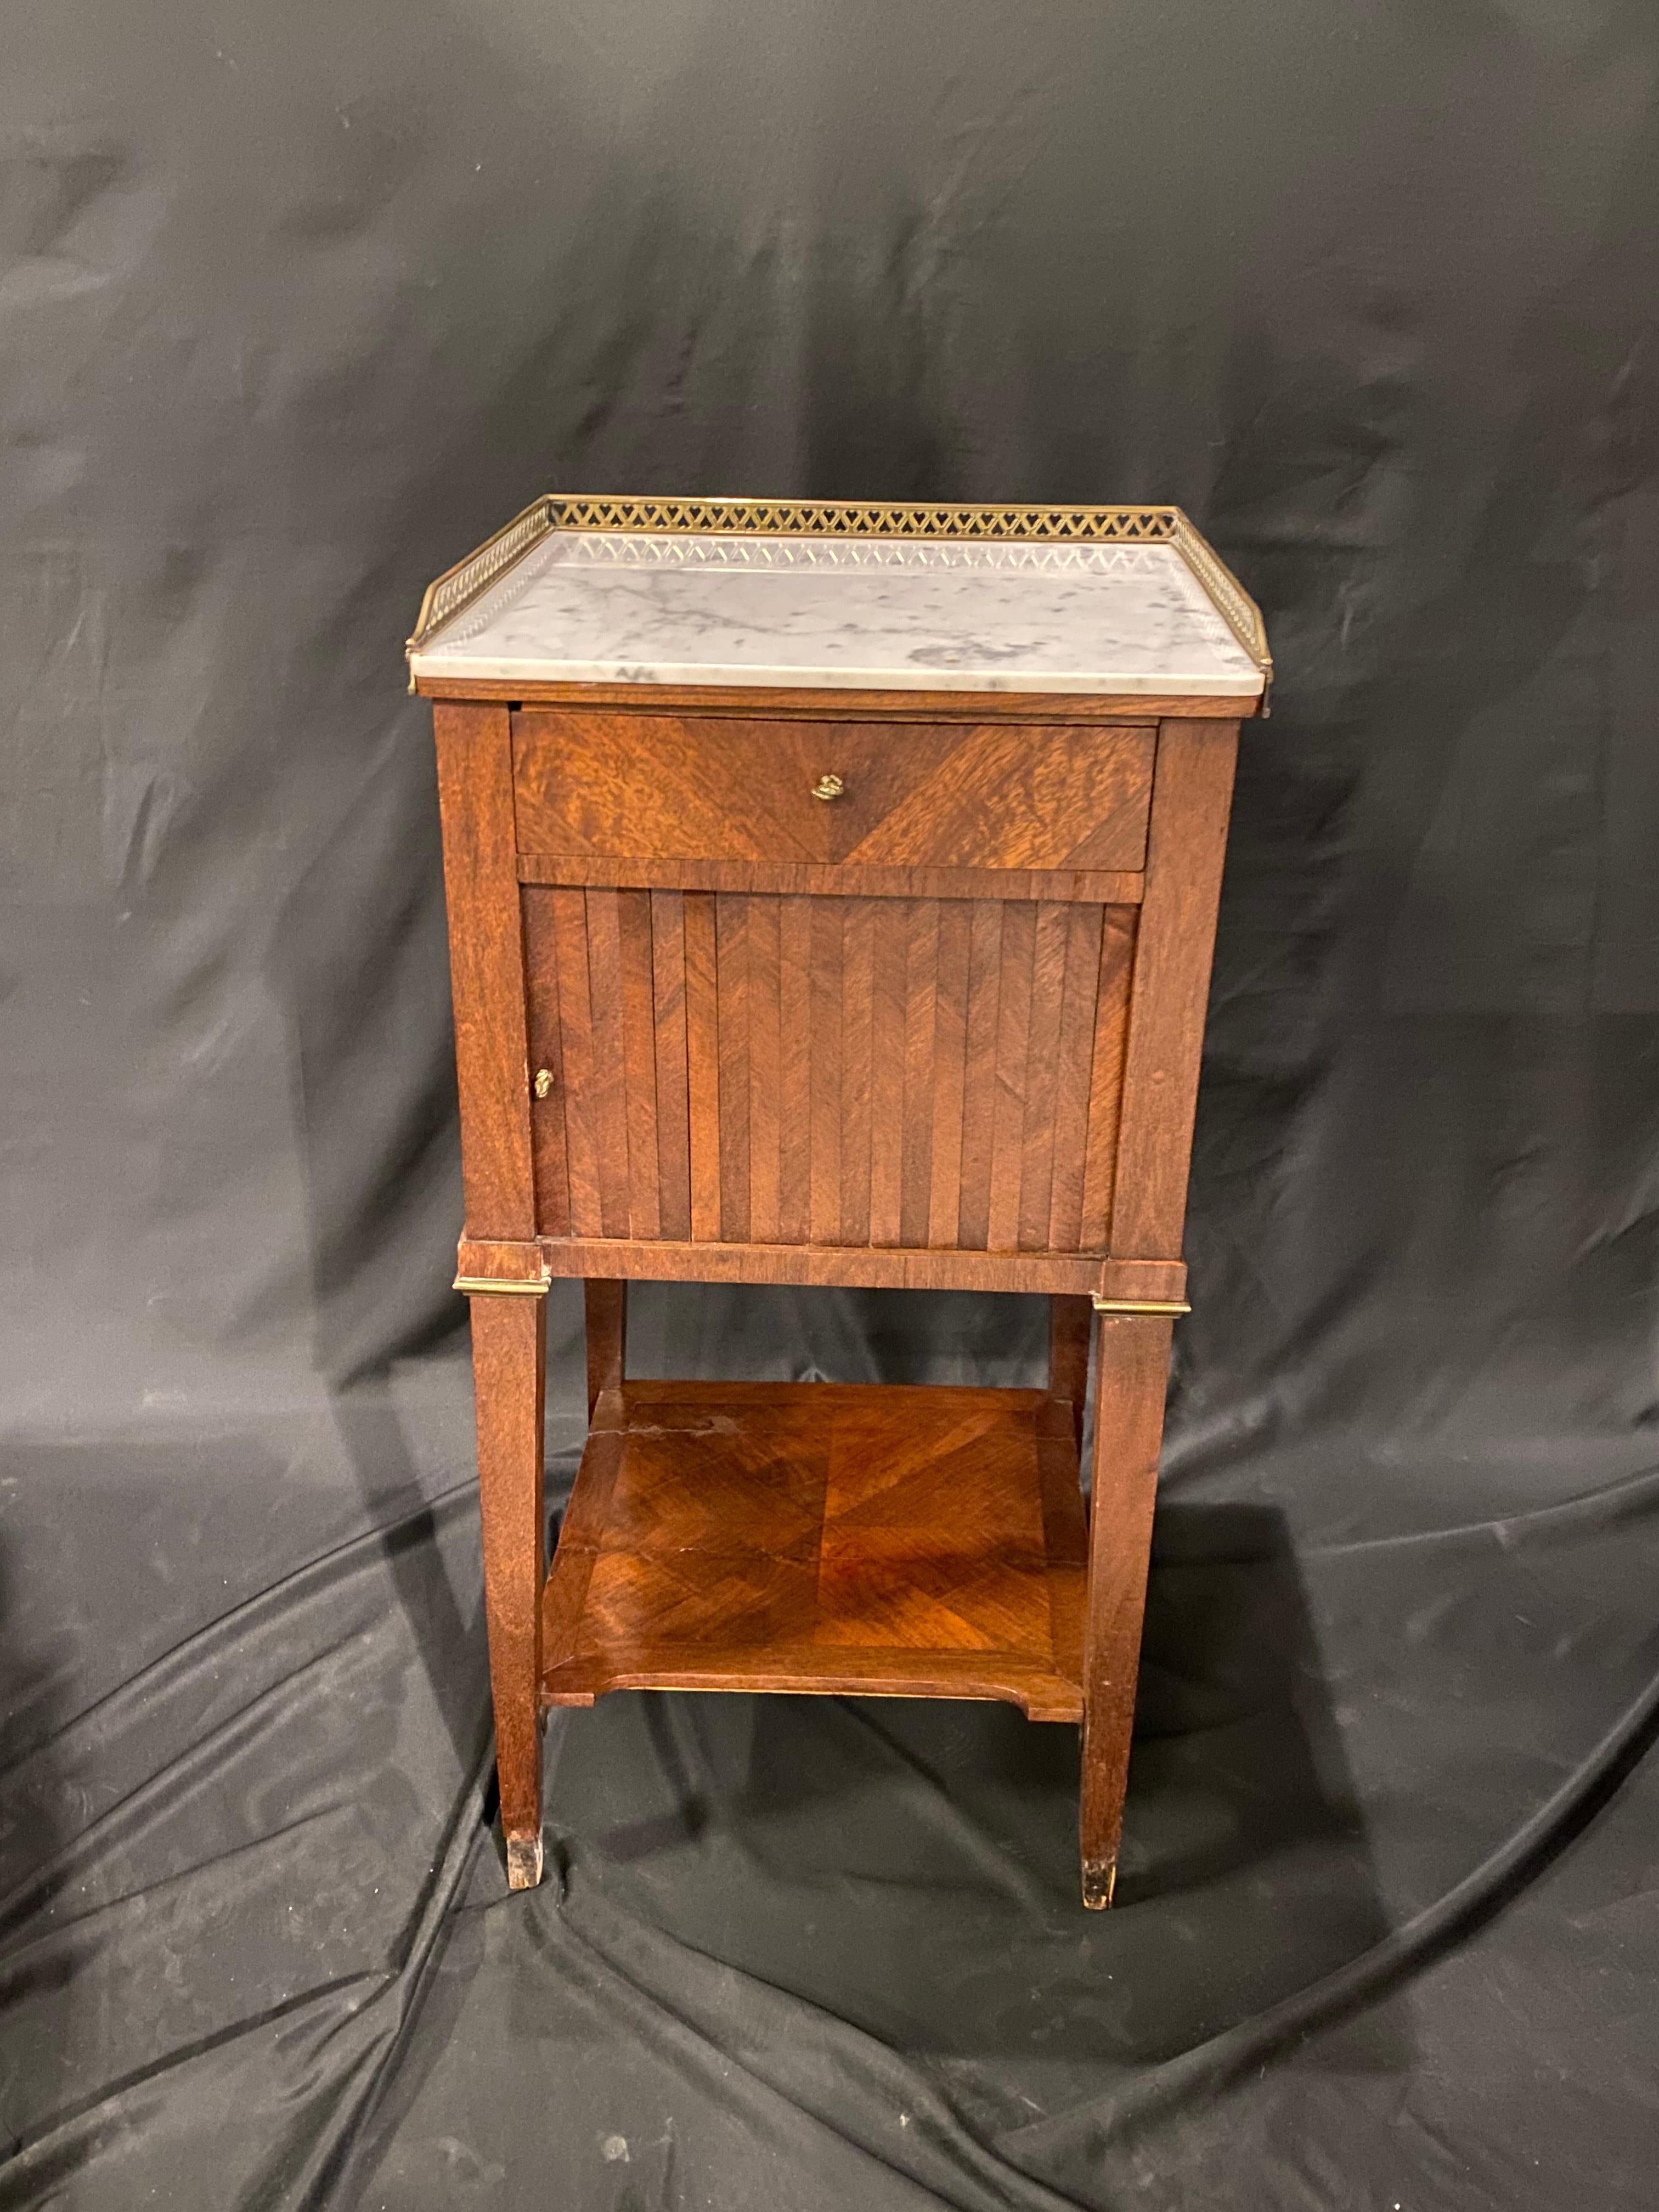 This 19th century French walnut side table with a lovely patina developed with age. The off white marble top is framed on three side with a brass gallery. The table has one drawer and a tambour door below, with a shelf at the base of the legs.